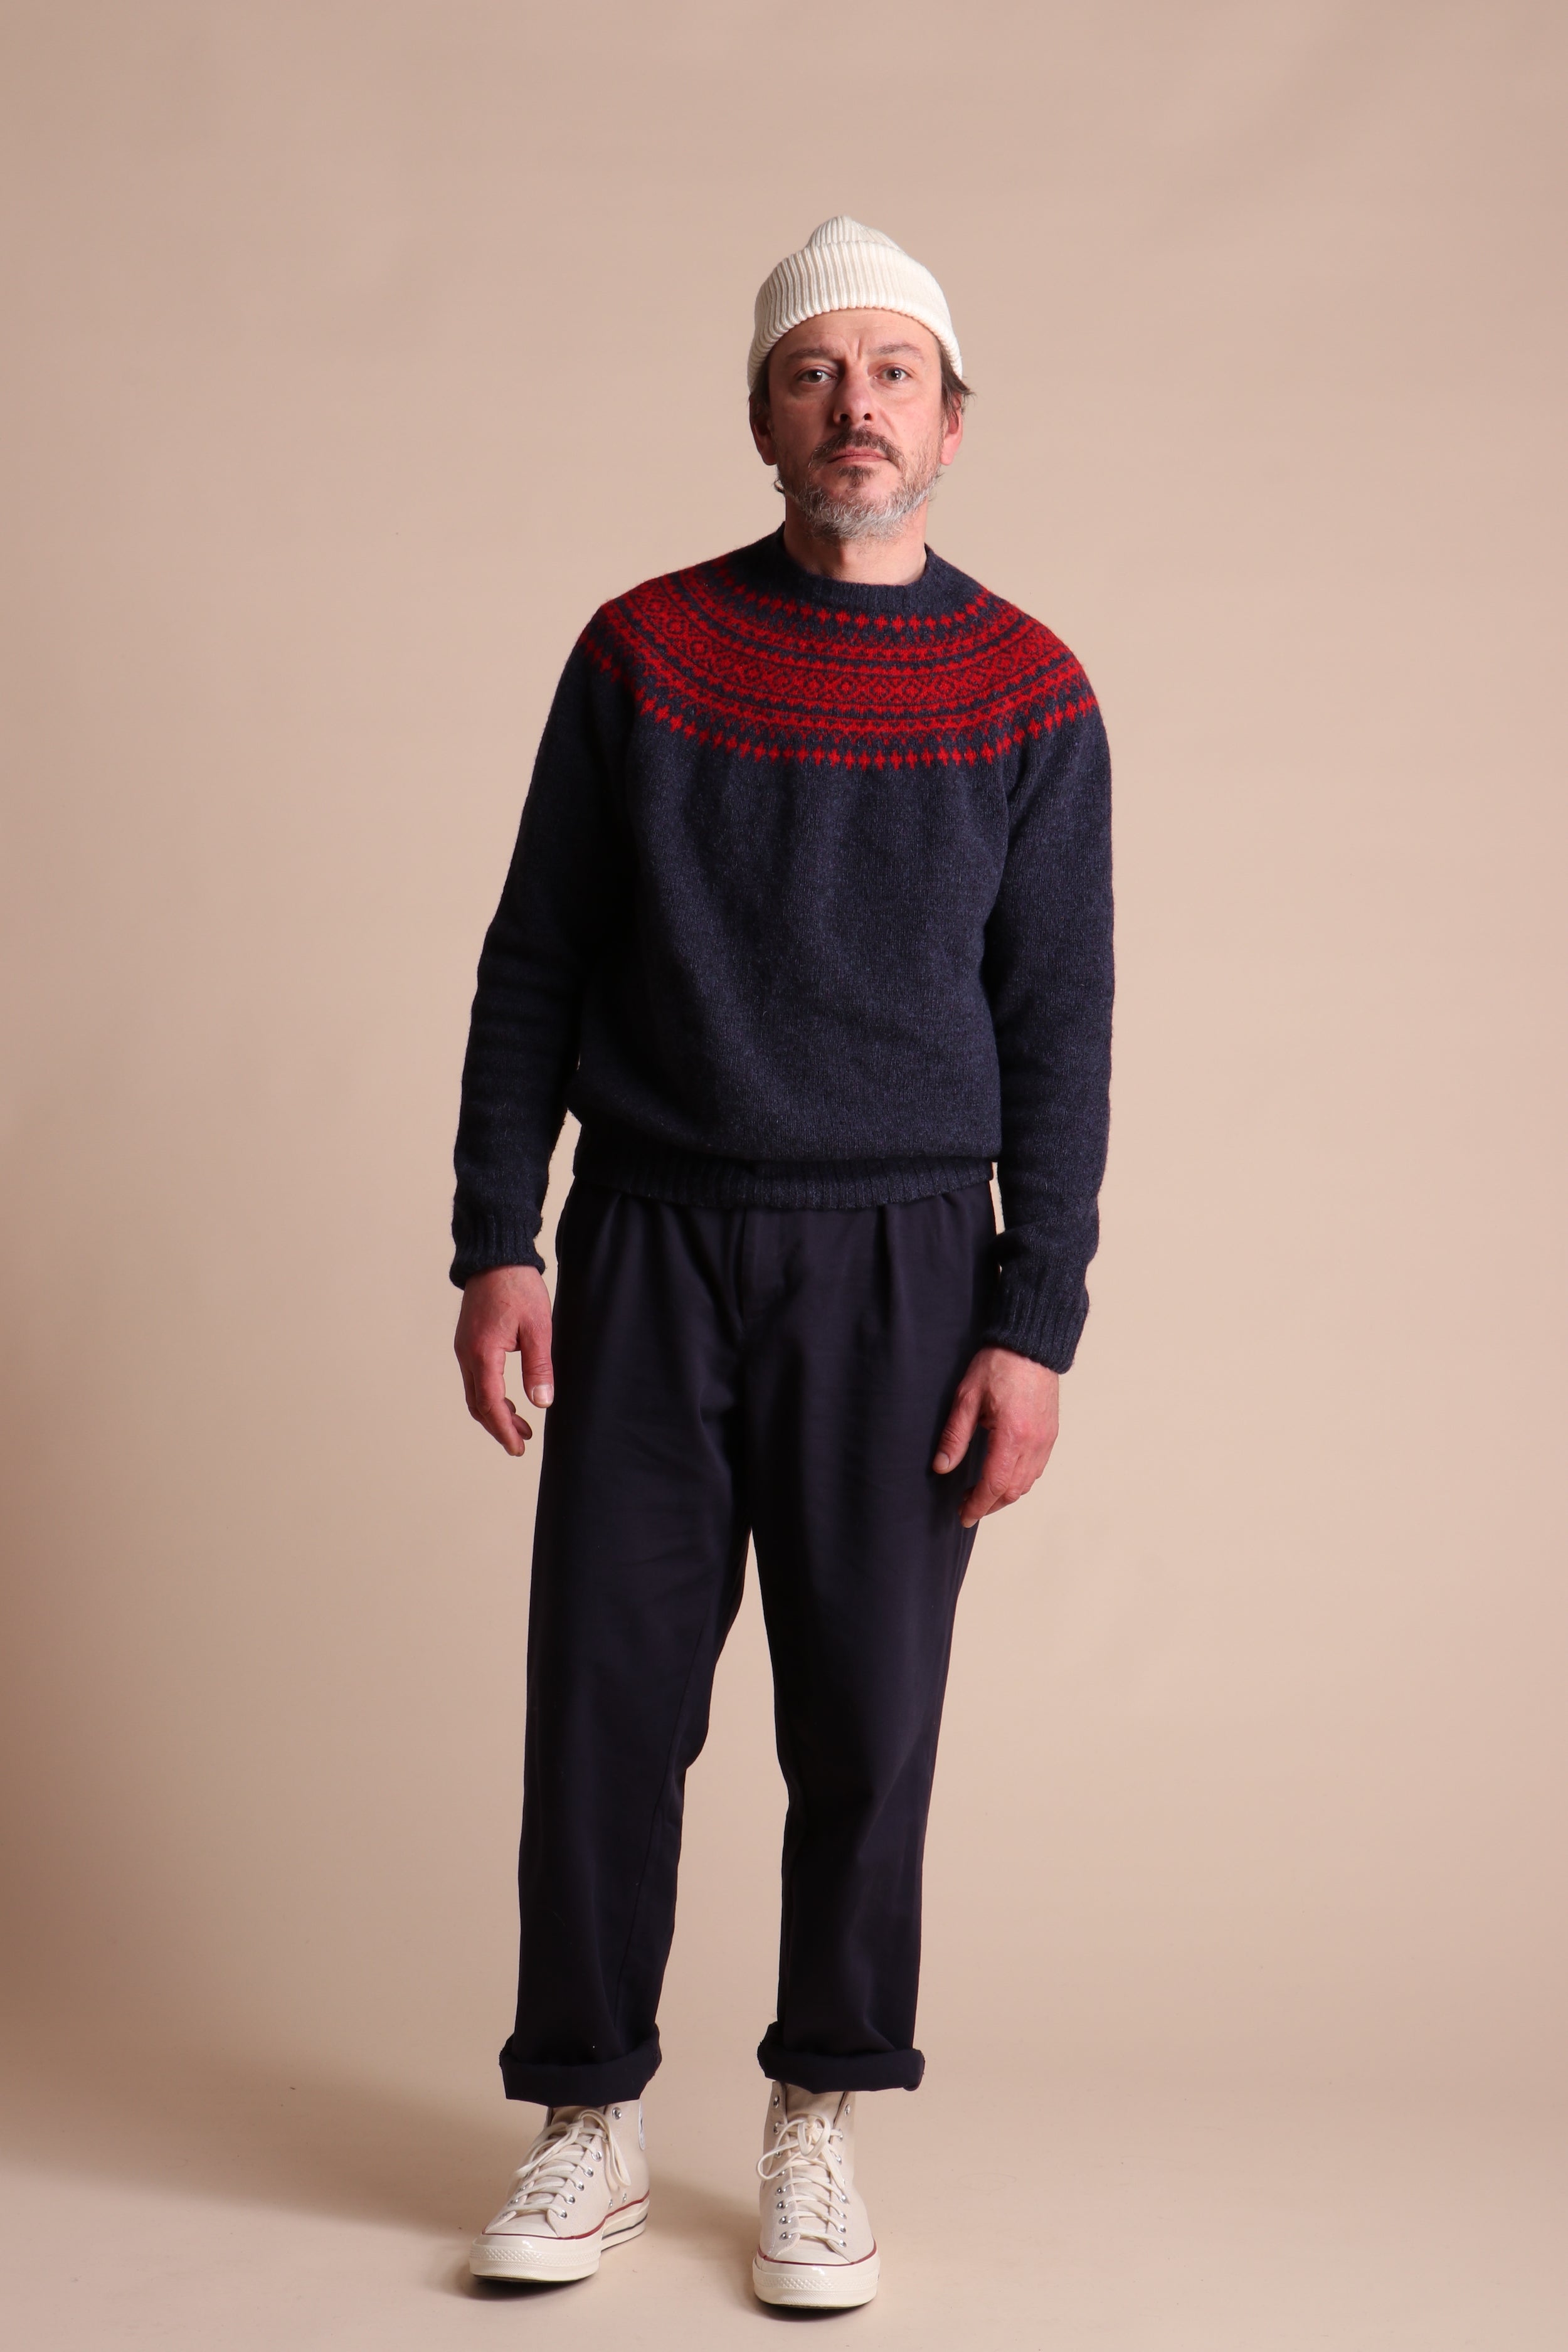 Man wears Carrier Company Shetland Lambswool Yoke Jumper in Ruby & Navy with Classic Trouser and Wool hat